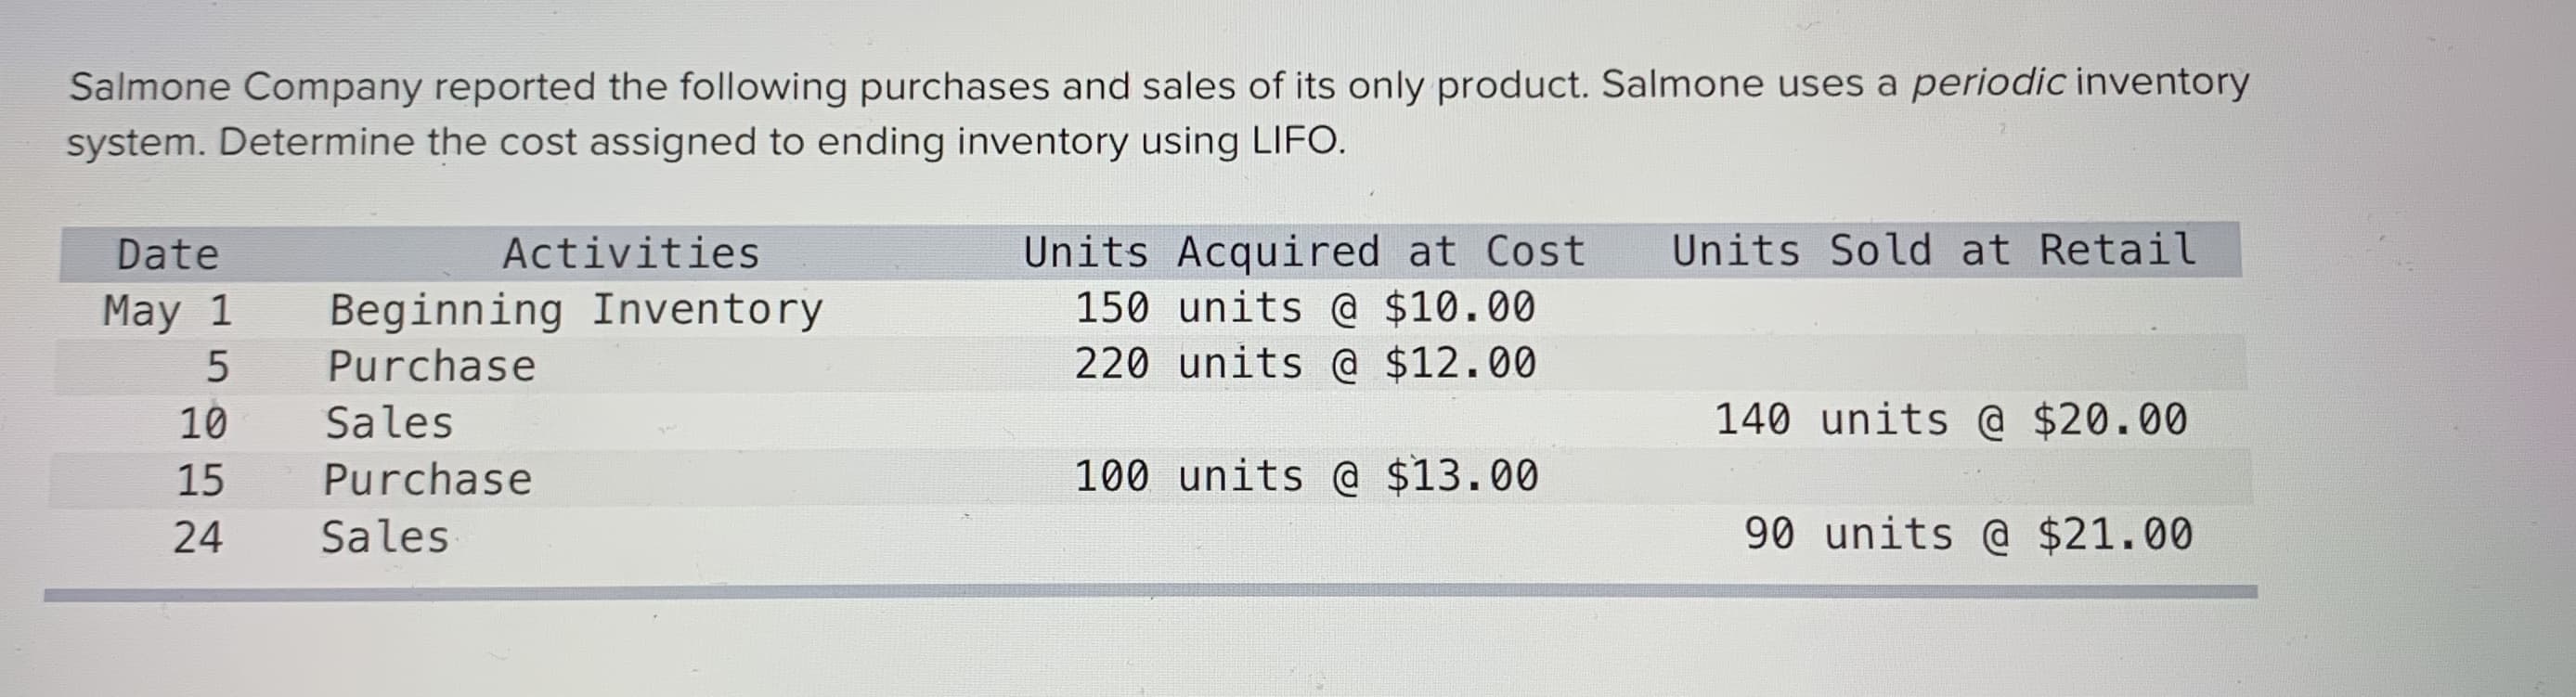 Salmone Company reported the following purchases and sales of its only product. Salmone uses a periodic inventory
system. Determine the cost assigned to ending inventory using LIFO.
Units Sold at Retail
Units Acquired at Cost
150 units @ $10.00
220 units @ $12.00
Date
Activities
May 1
Beginning Inventory
Purchase
10
Sales
140 units @ $20.00
15
Purchase
100 units @ $13.00
24
Sales
90 units @ $21.00
